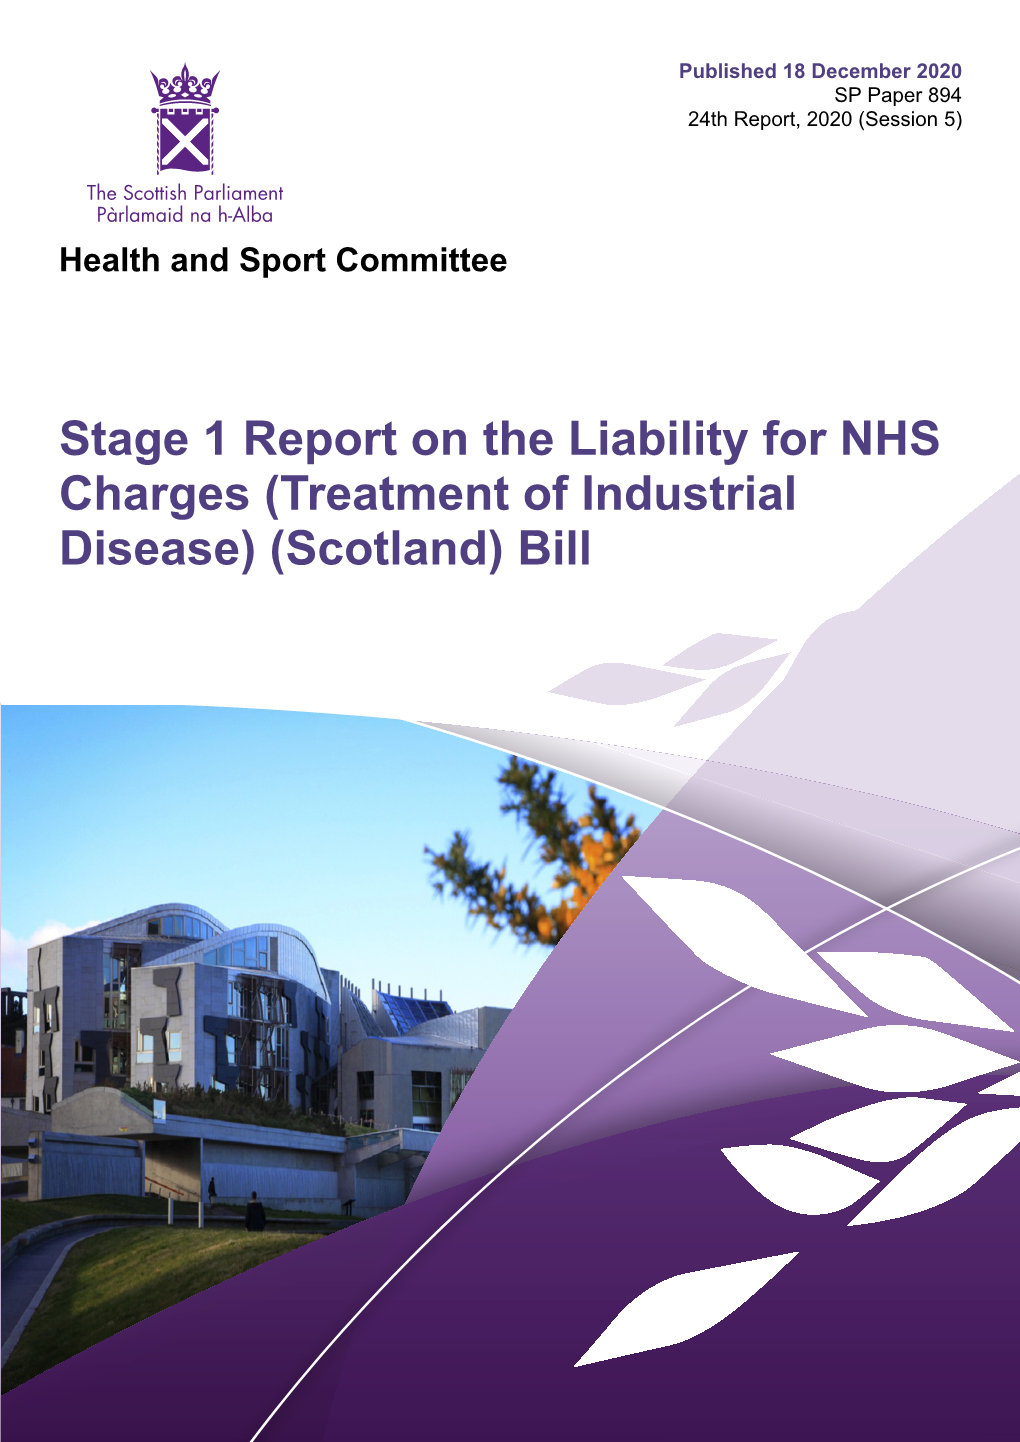 (Treatment of Industrial Disease) (Scotland) Bill Published in Scotland by the Scottish Parliamentary Corporate Body